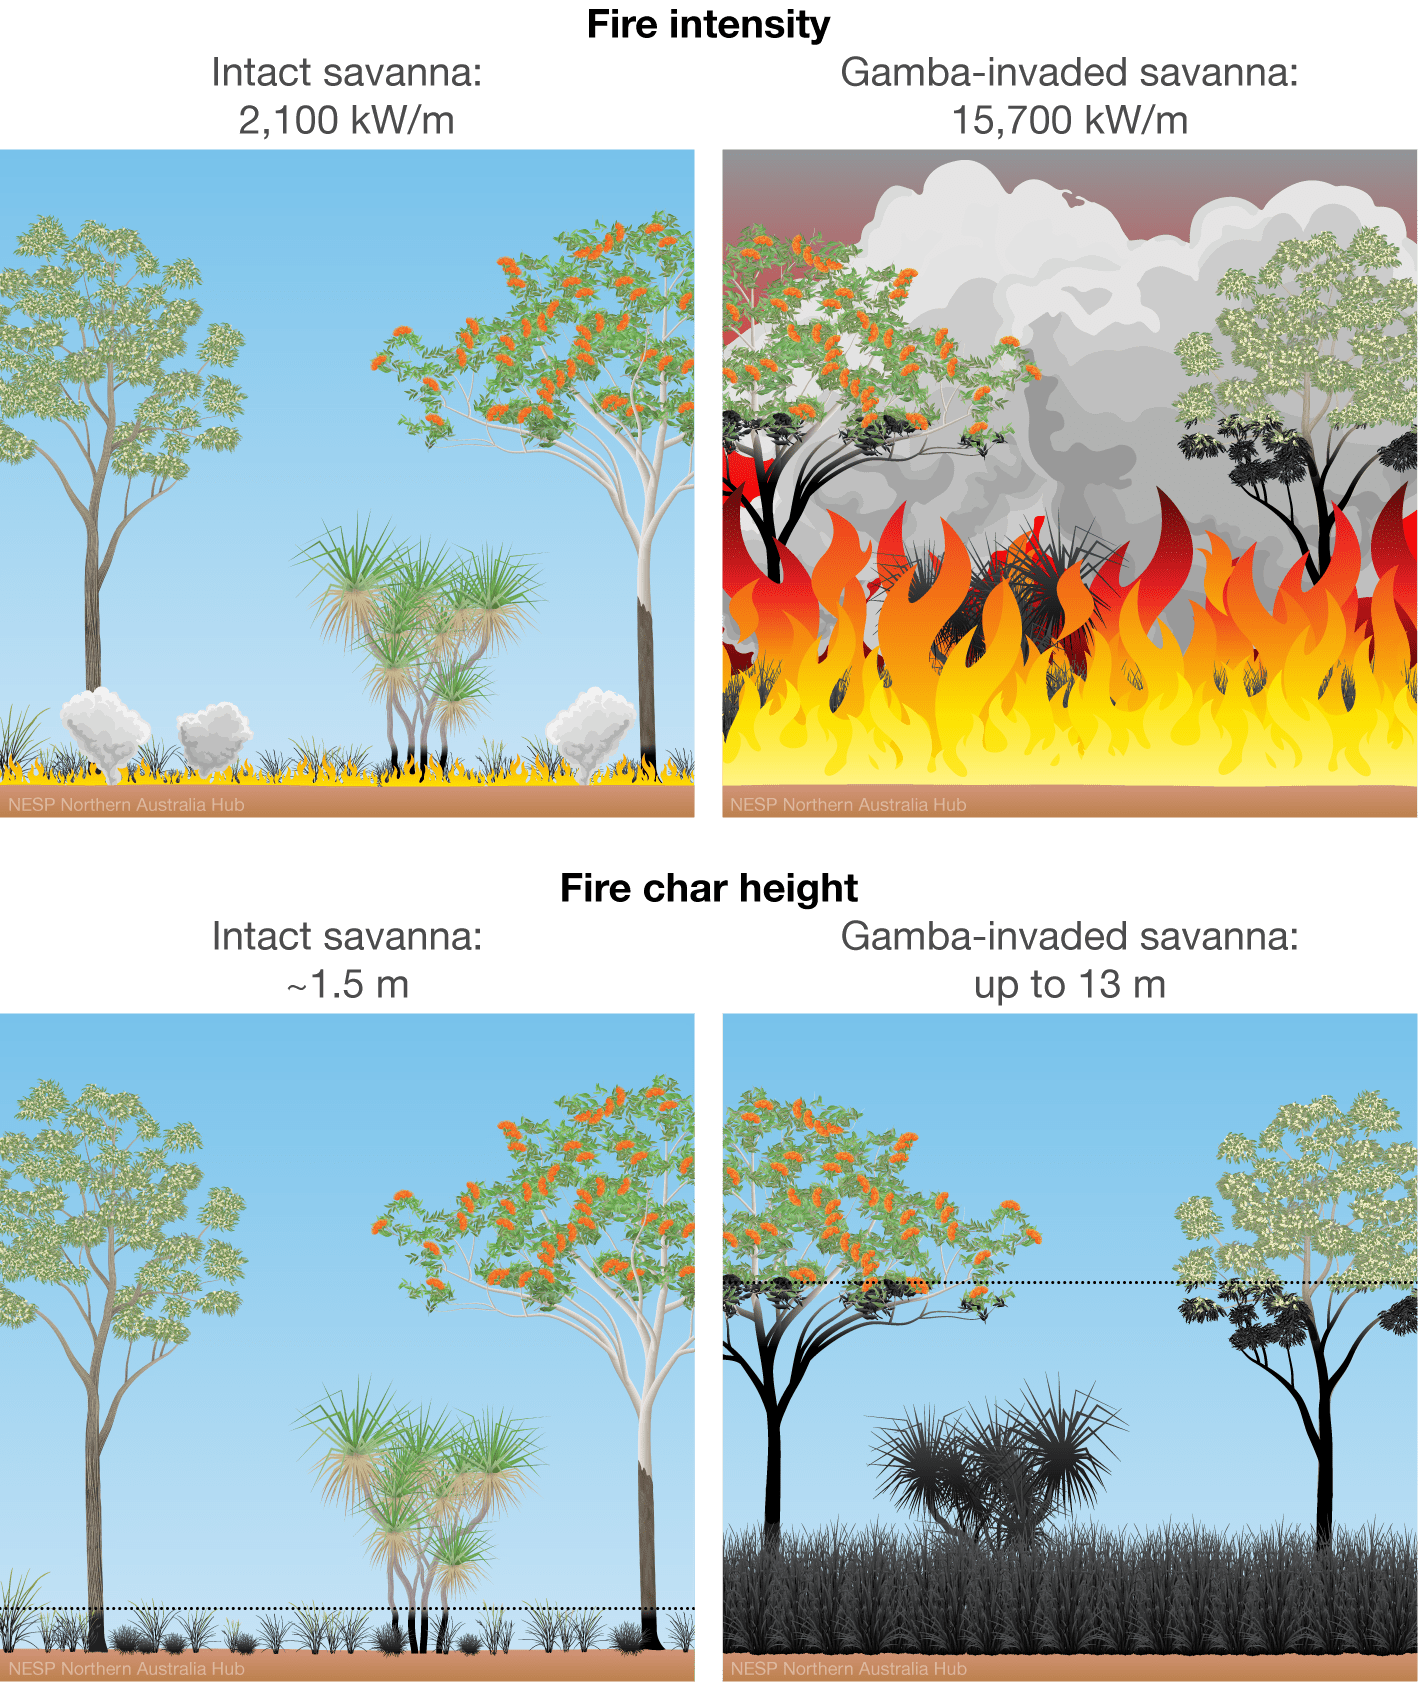 Graphic showing how gamba-invaded savannas have greater fire intensities and char height than intact native savanna ecosystems.